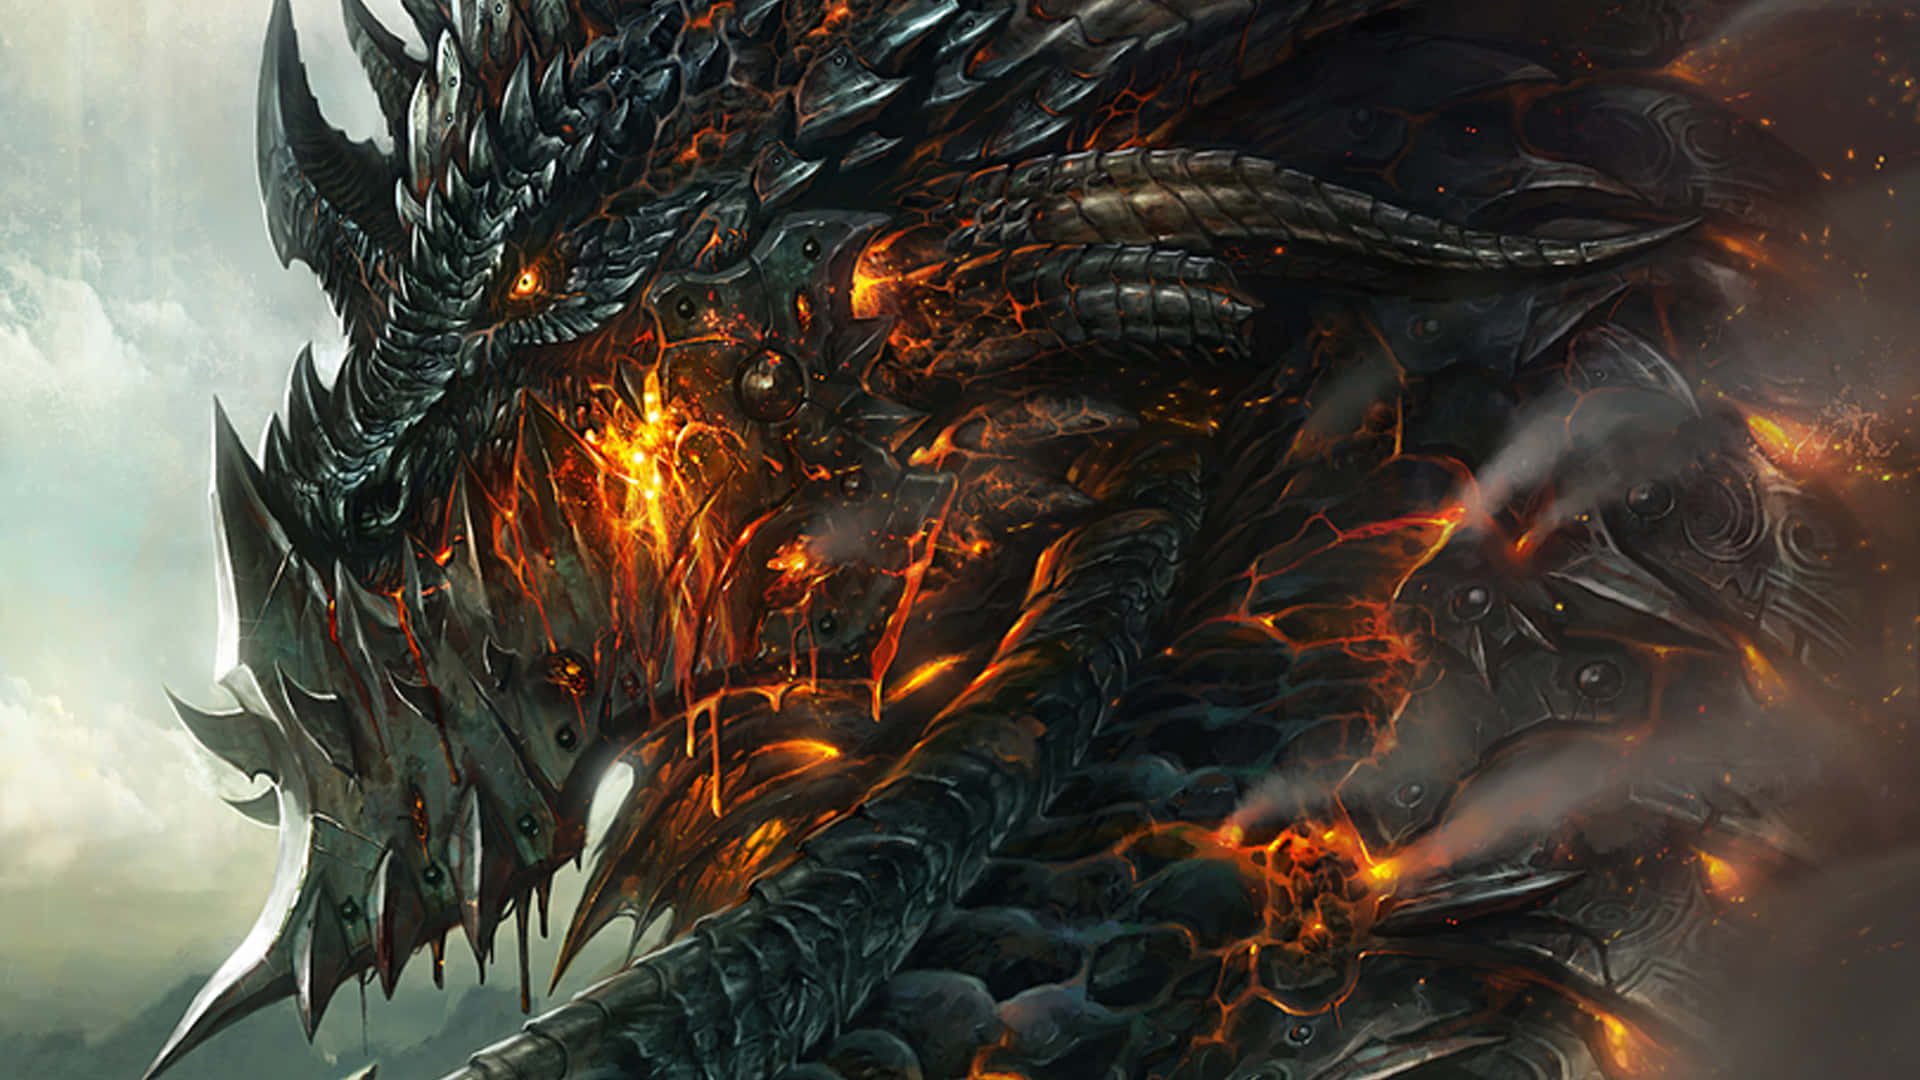 awesome pictures of dragons